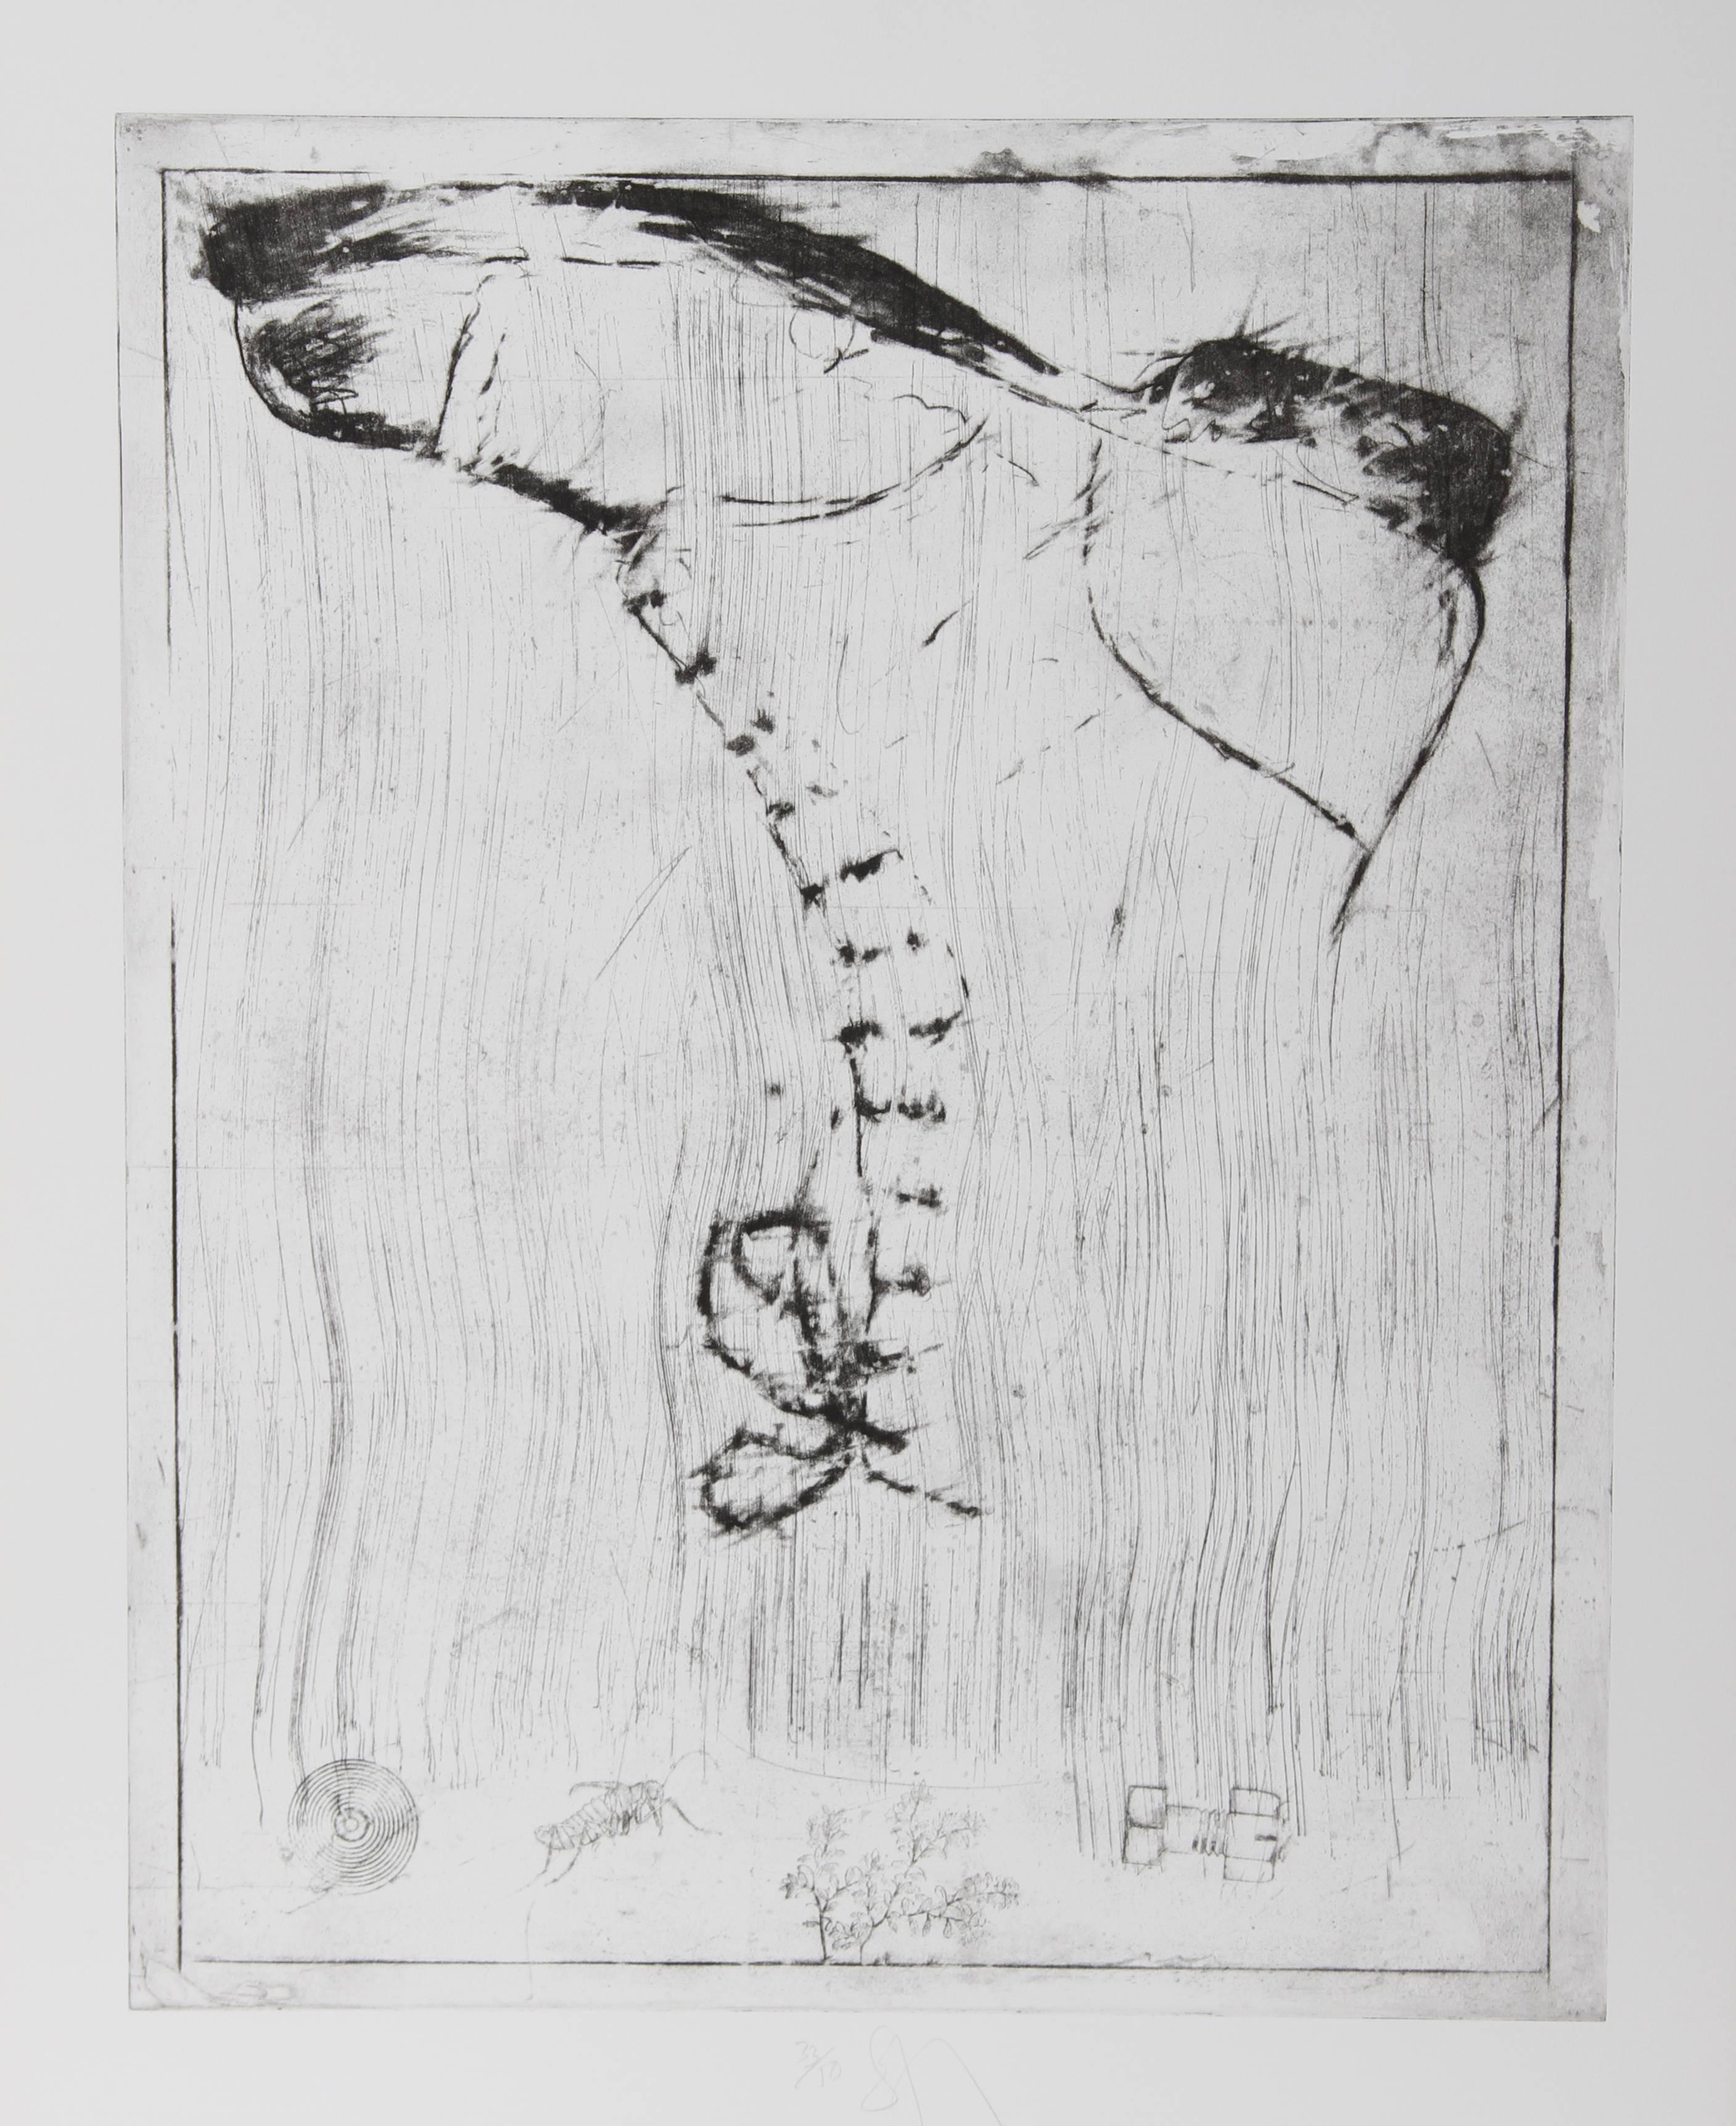 Artist:  Donald Saff, American (1937 - )
Title:  Boot
Year:  1980
Medium:  Etching, signed and numbered in pencil
Edition:  50
Image Size:  24 x 18.5 inches
Size:  30 in. x 22 in. (76.2 cm x 55.88 cm)